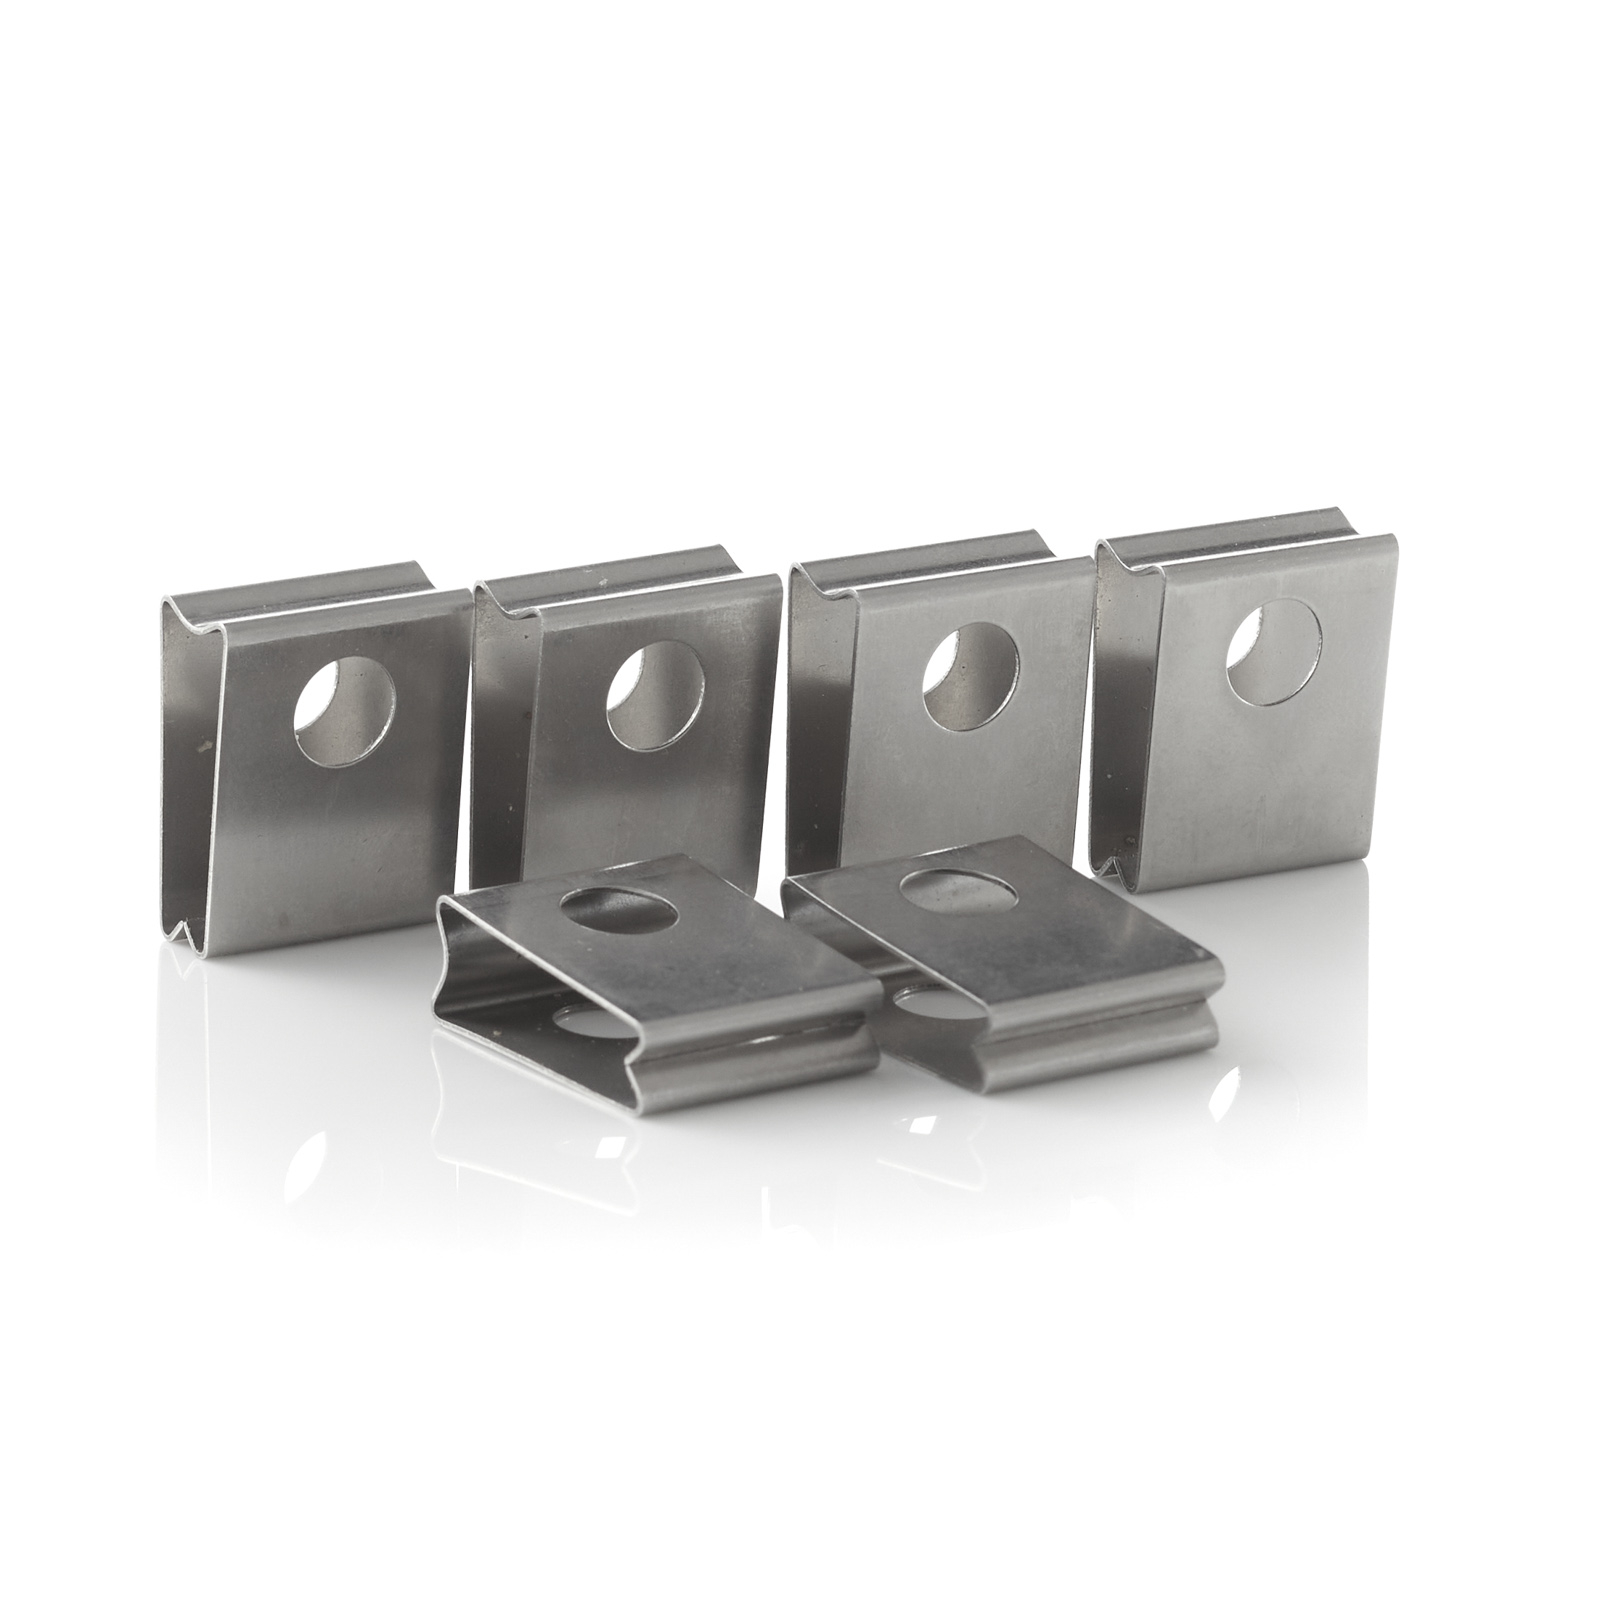 Eutrac spring clip for 3-circuit recessed track